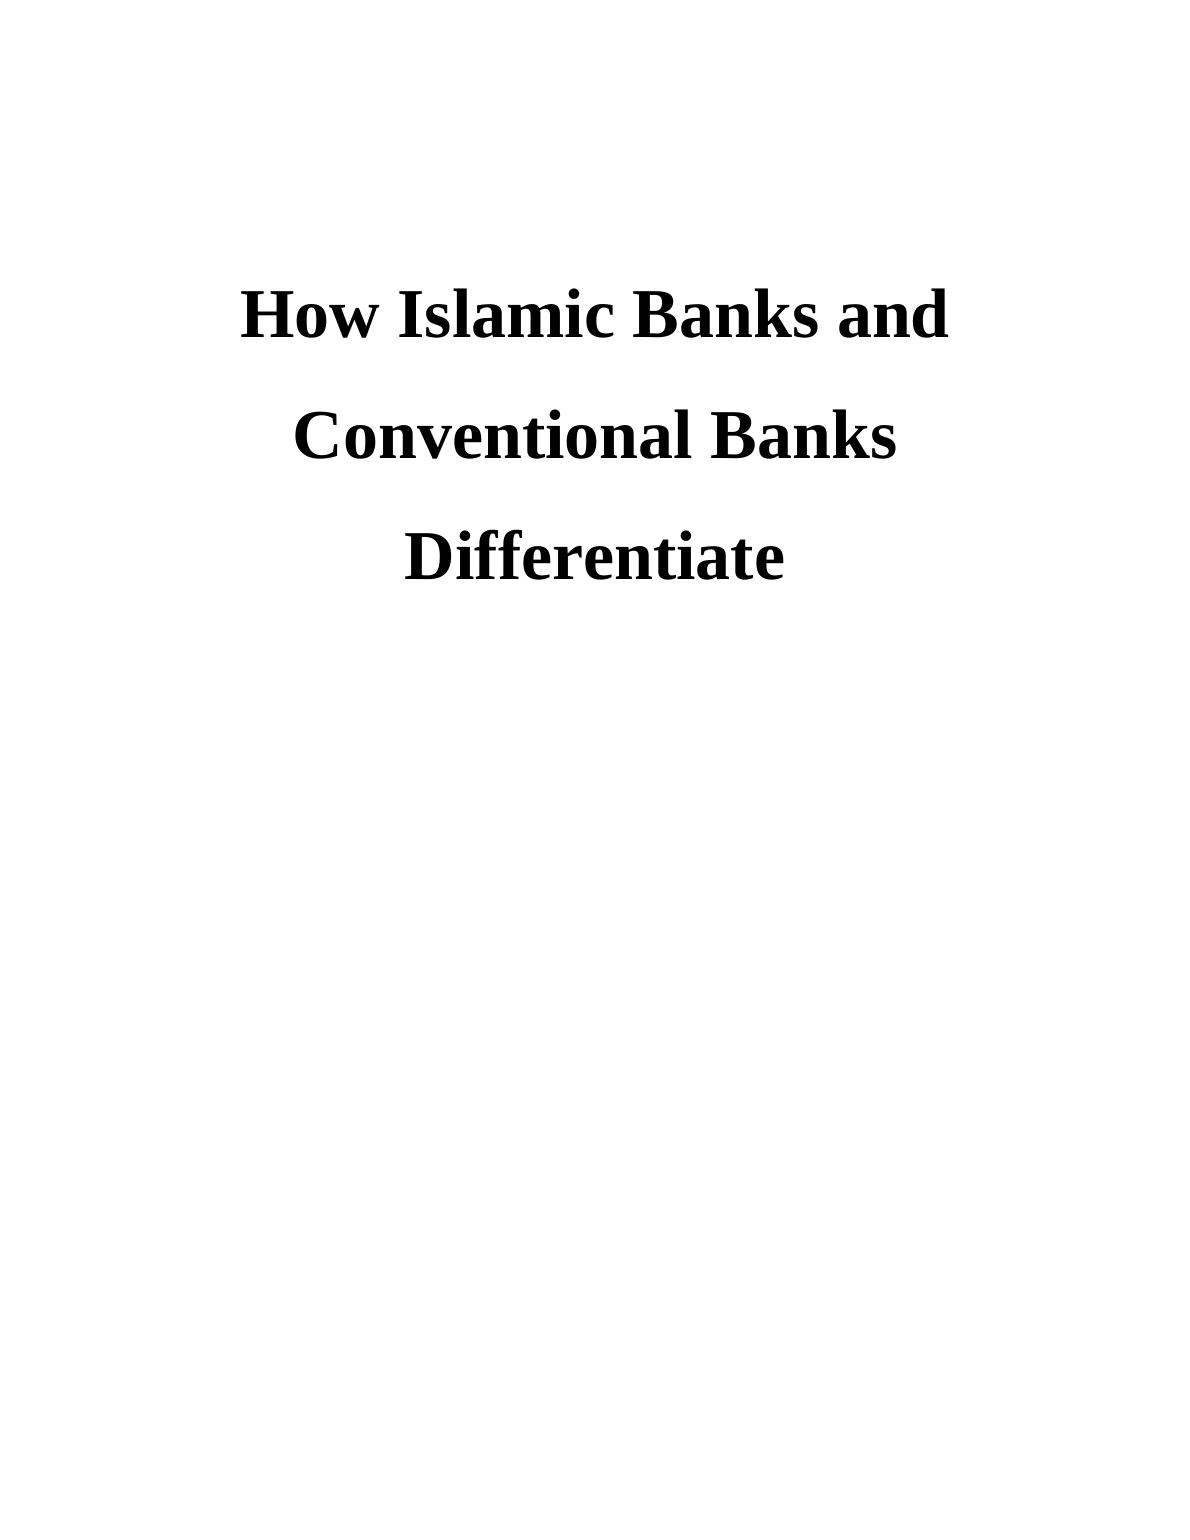 Assignment on Islamic Banks and Conventional Banks Differentiate_1